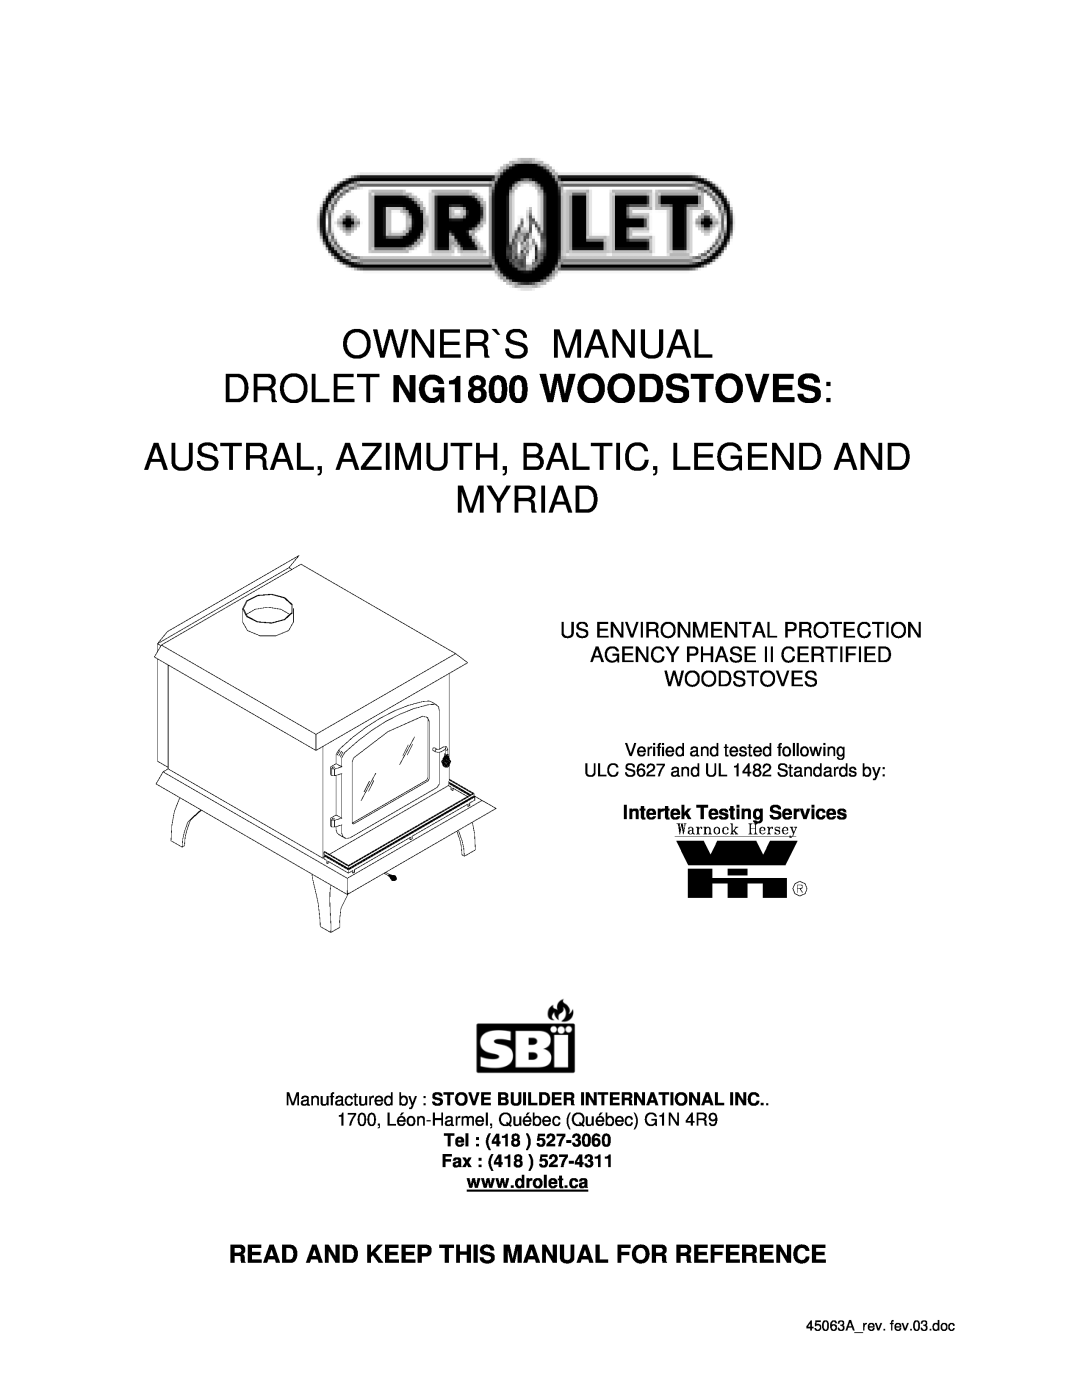 Drolet owner manual Read And Keep This Manual For Reference, Owner`S Manual, DROLET NG1800 WOODSTOVES, Tel 418 Fax 418 